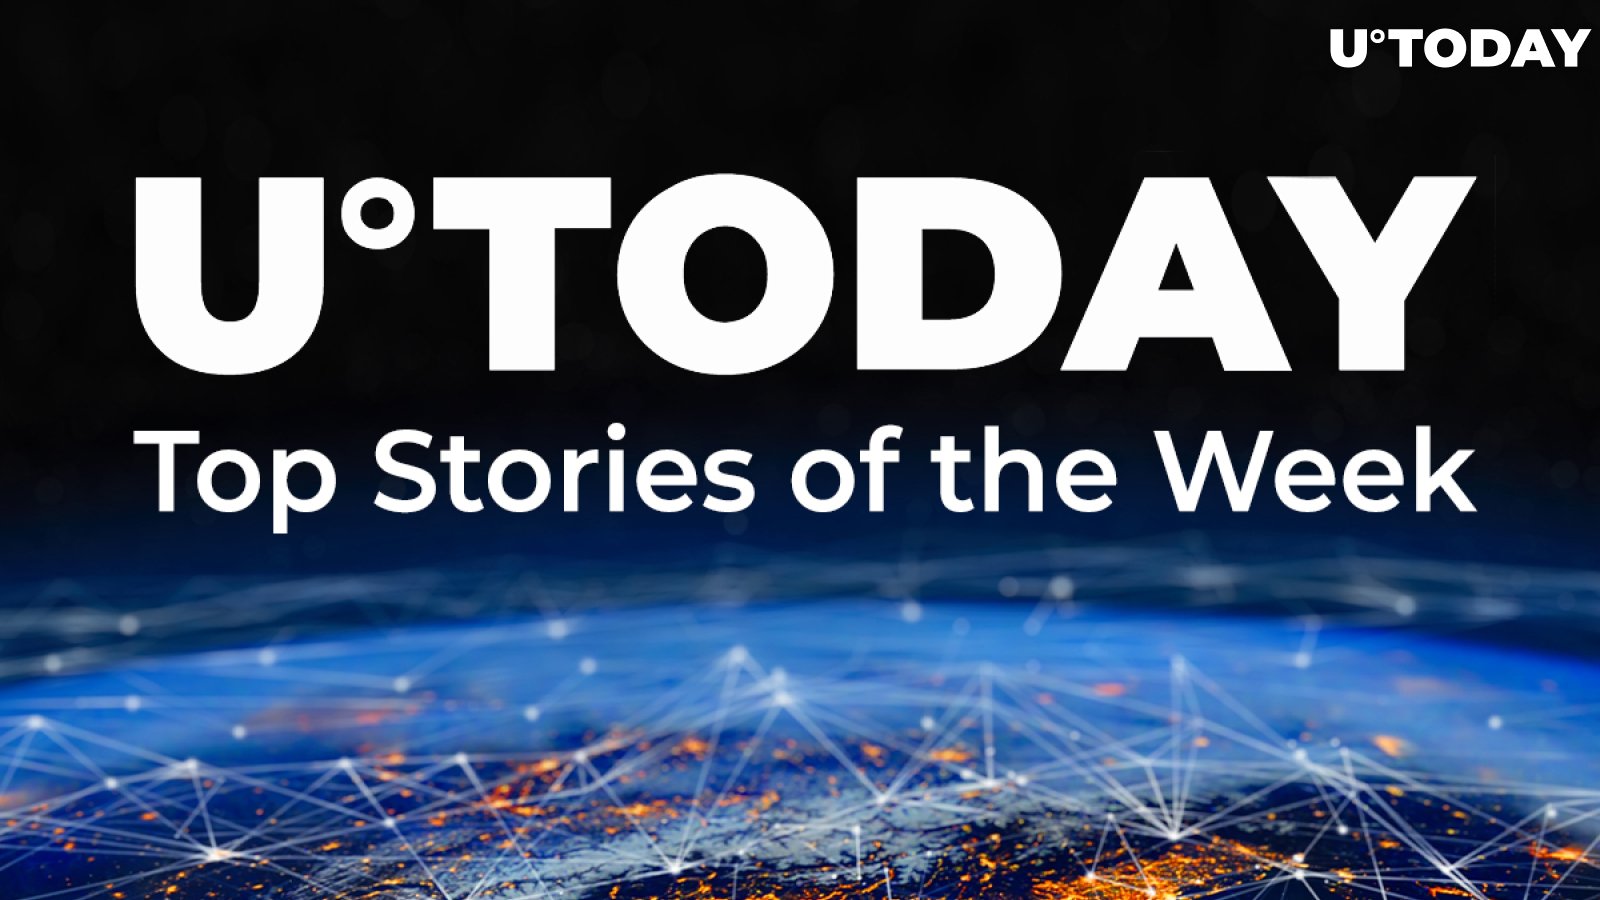 Top Stories of the Week: Cardano Listing on Coinbase, New Bitcoin ETF and More in One Video